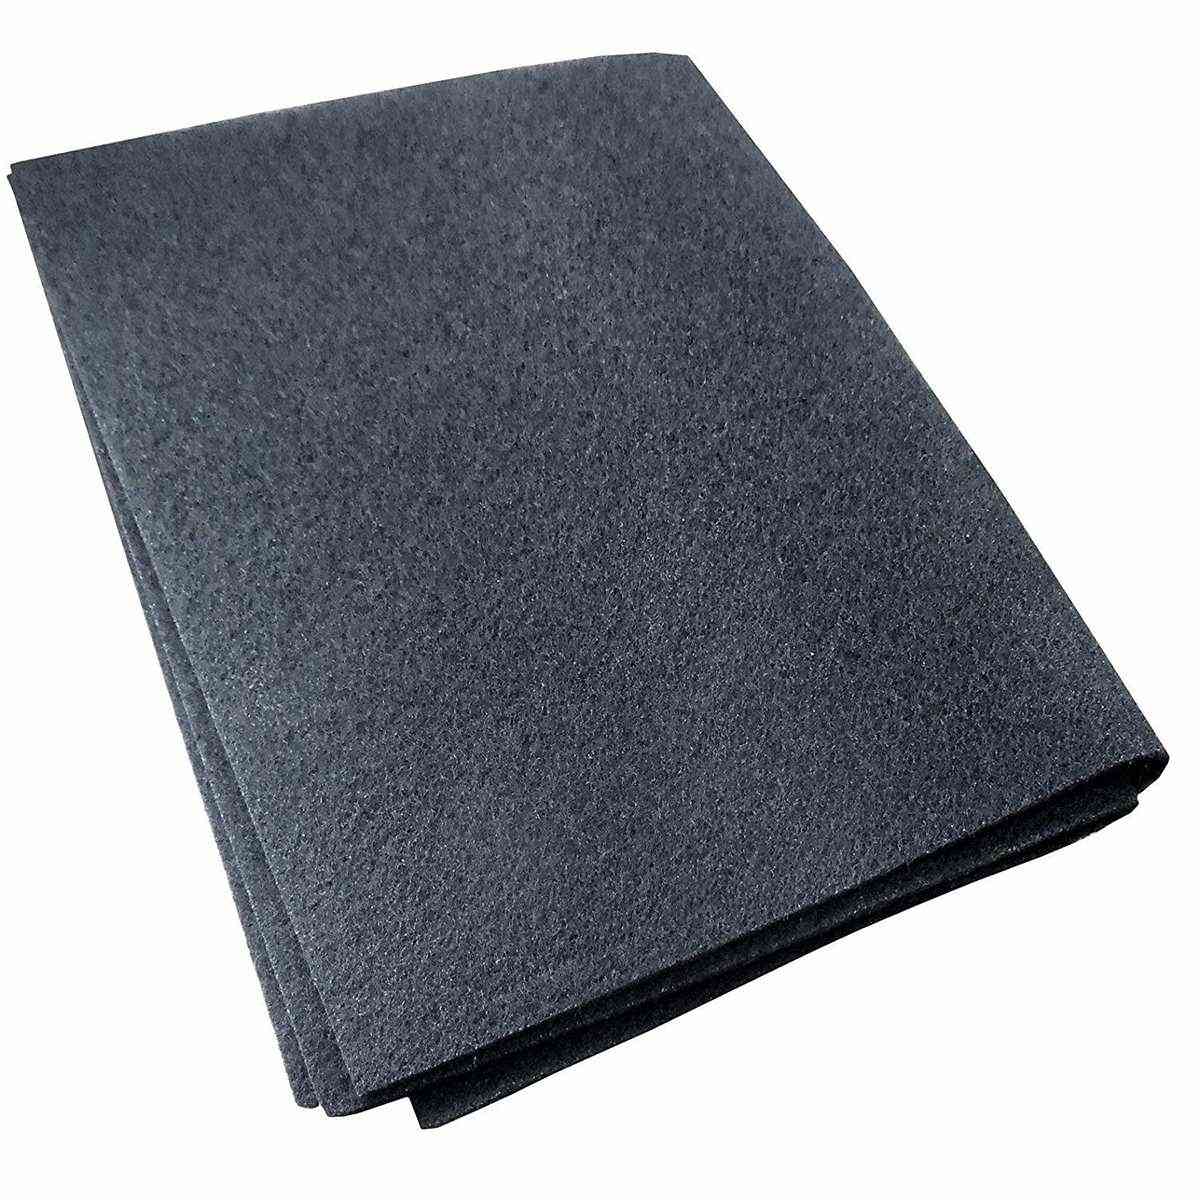 Carbon Cooker Hood Filter Cut To Size Charcoal Vent Filters For All Hoods